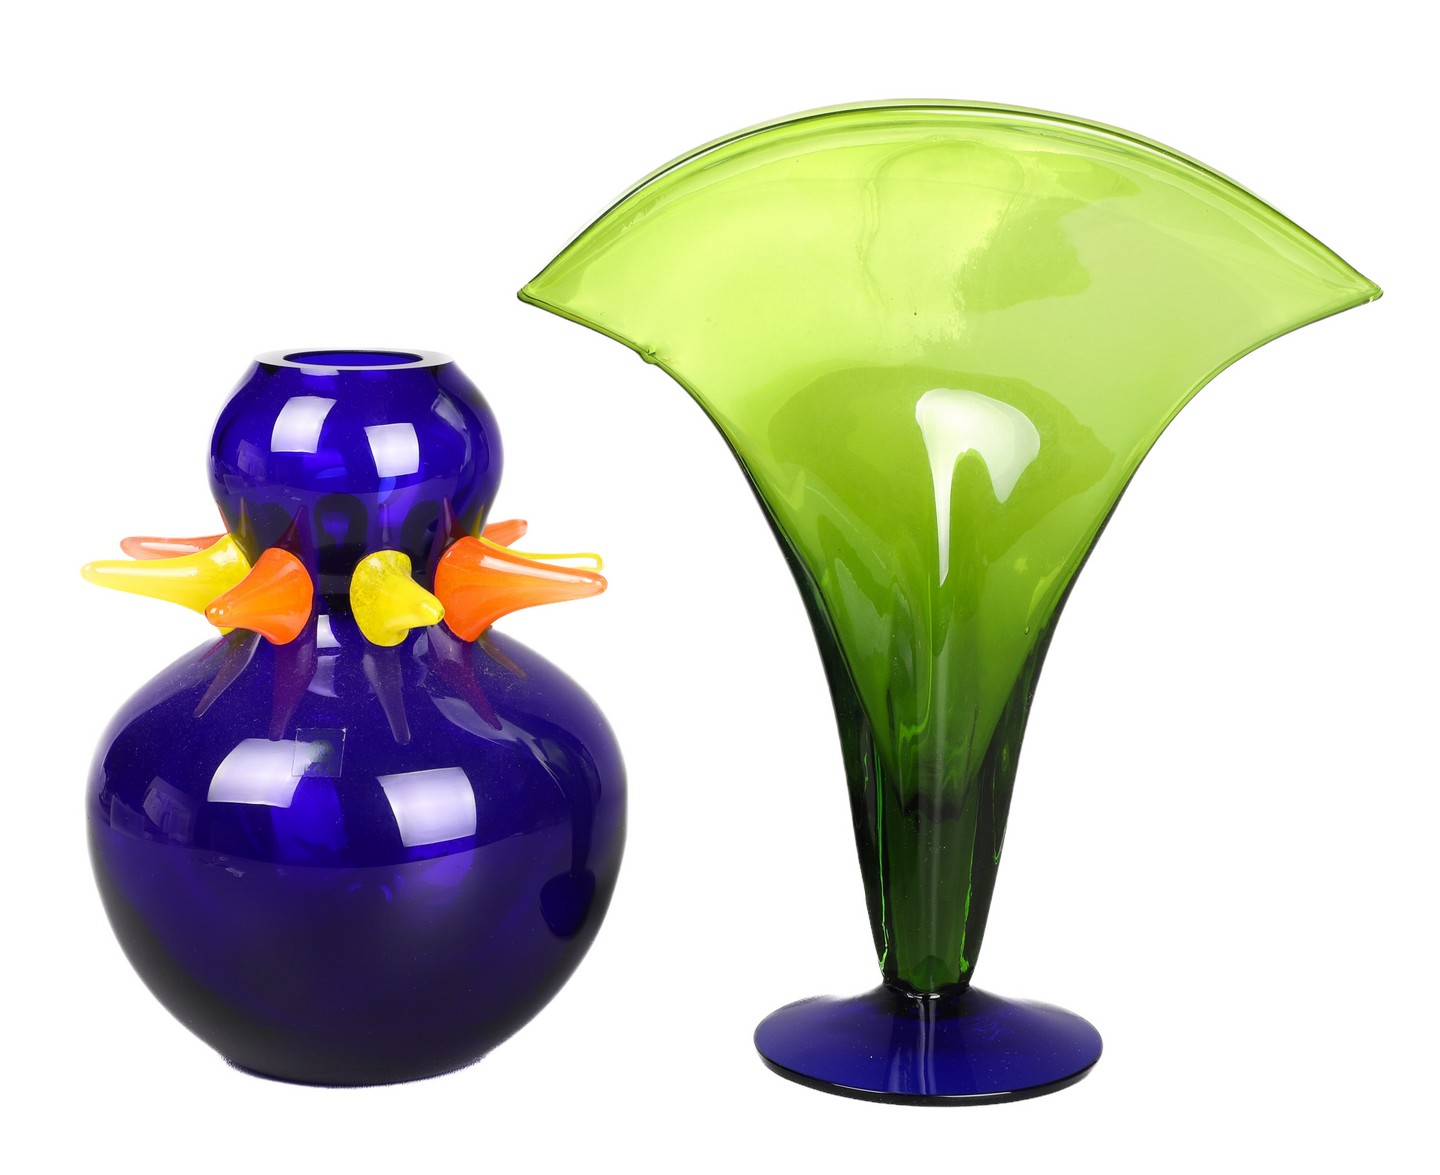  2 Czech art glass vases to include 27a5cf